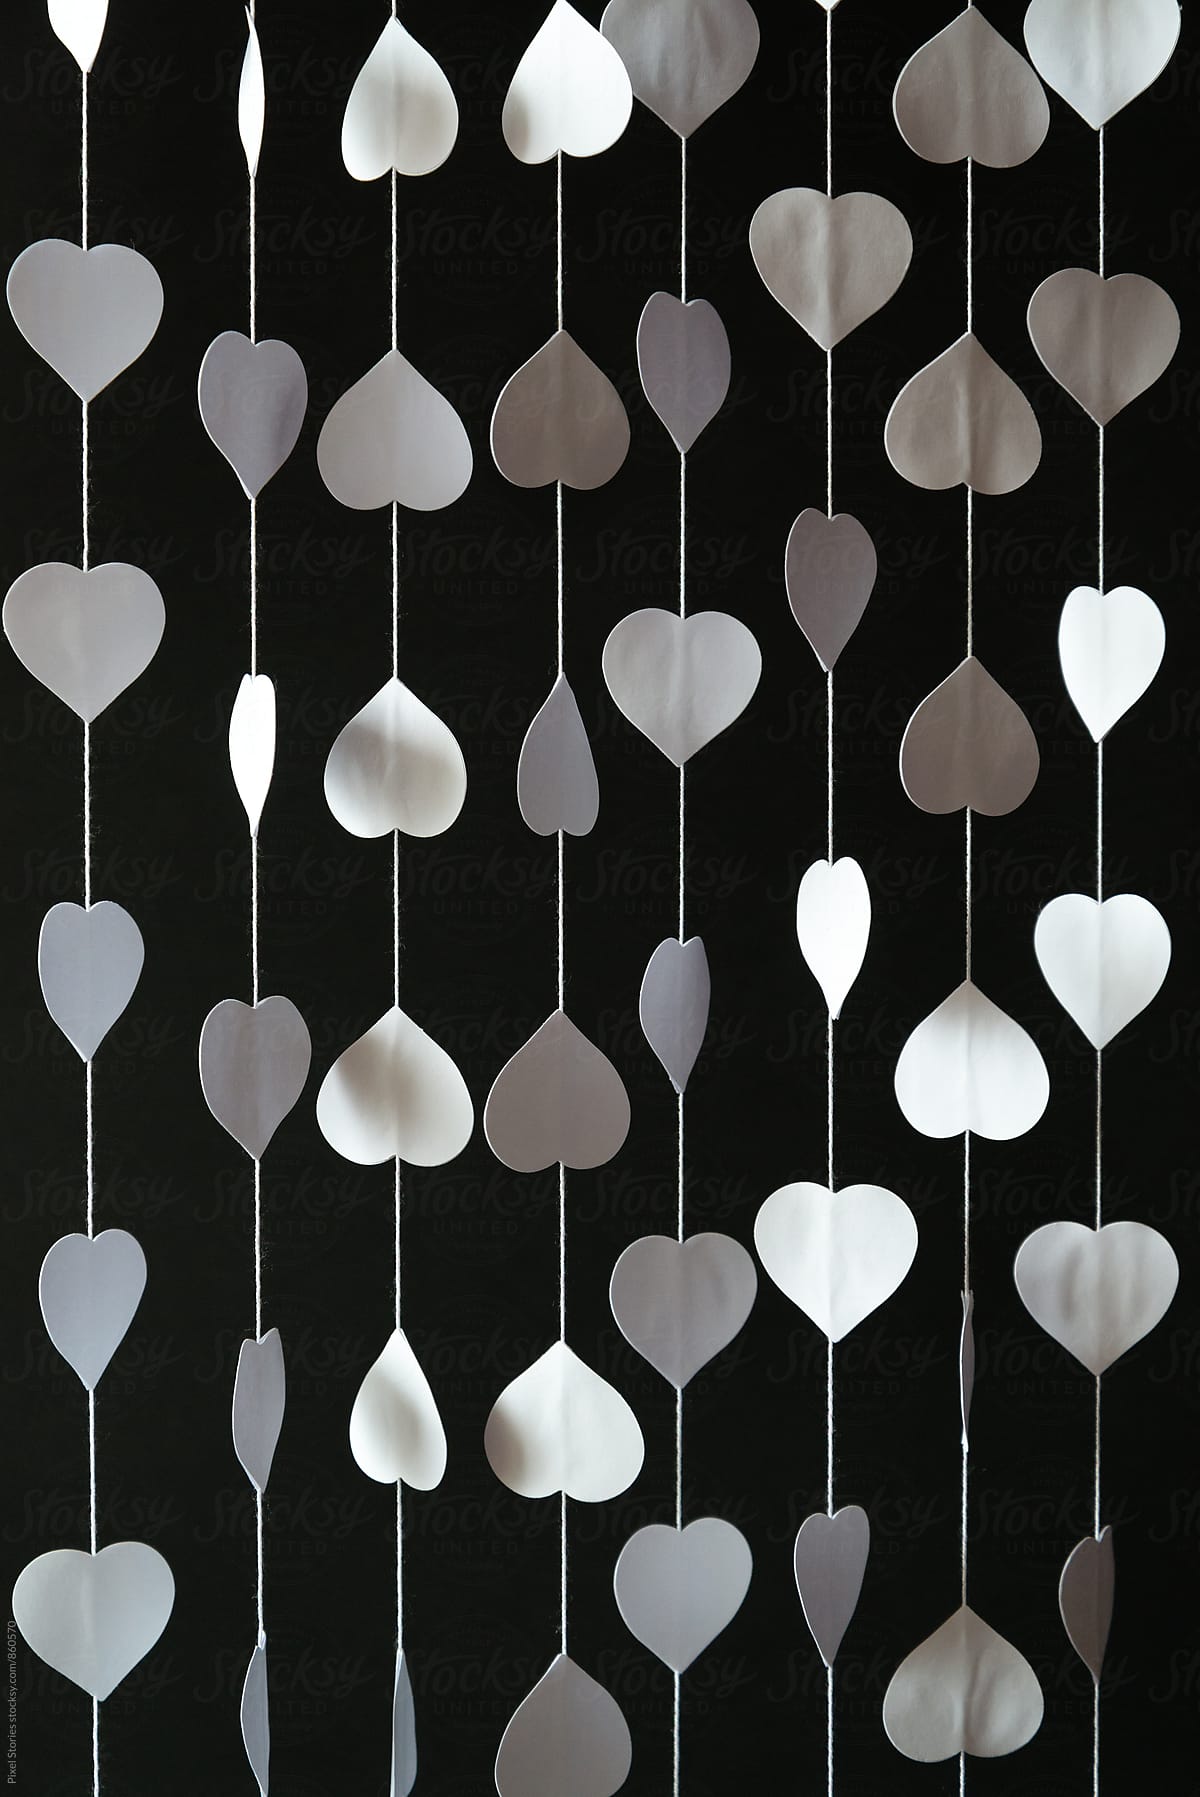 Diy white hearts curtain over black background